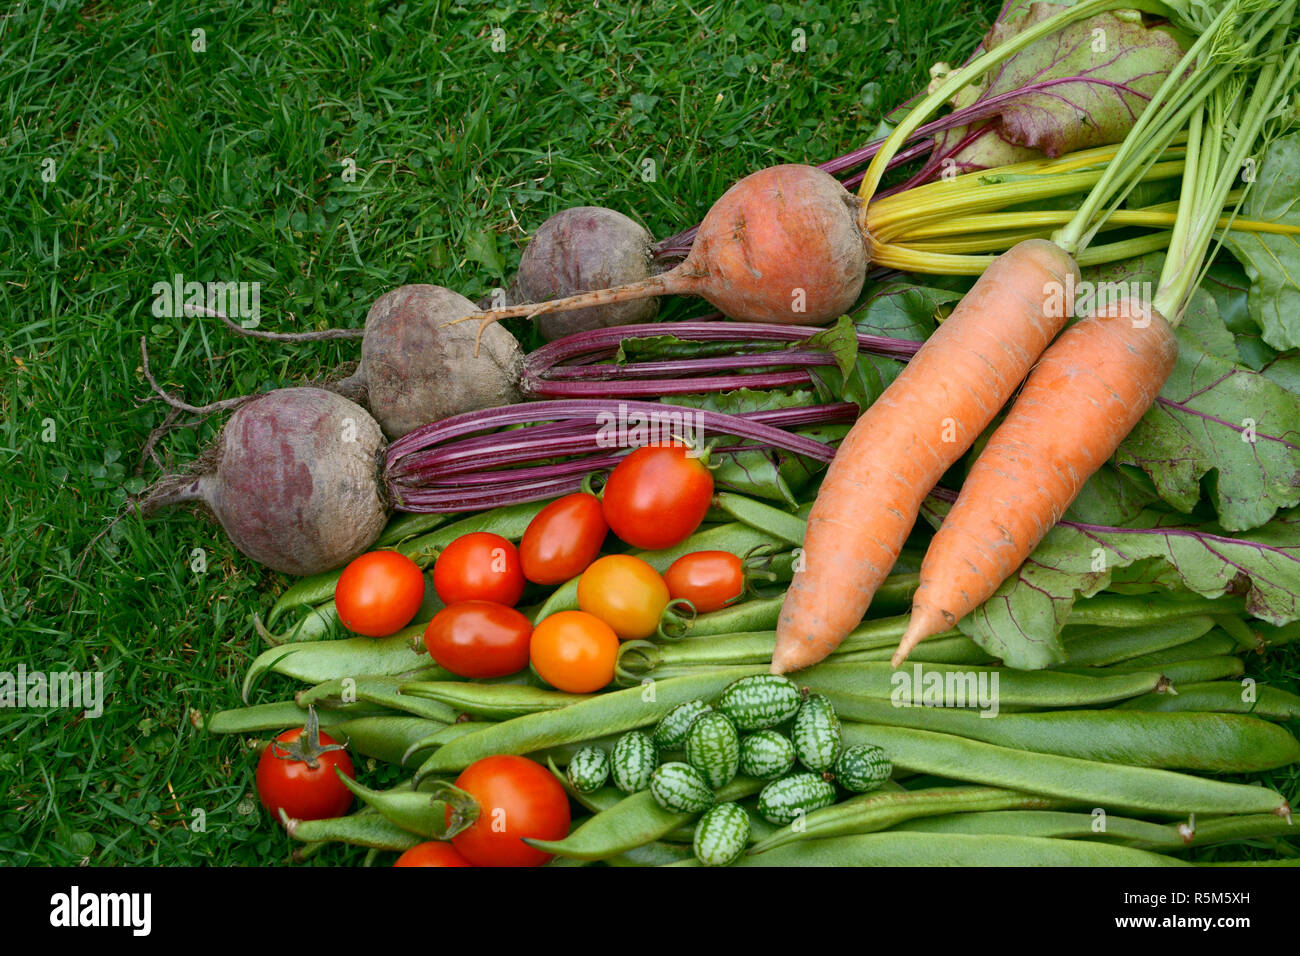 Vegetables fresh from the garden on the lawn Stock Photo